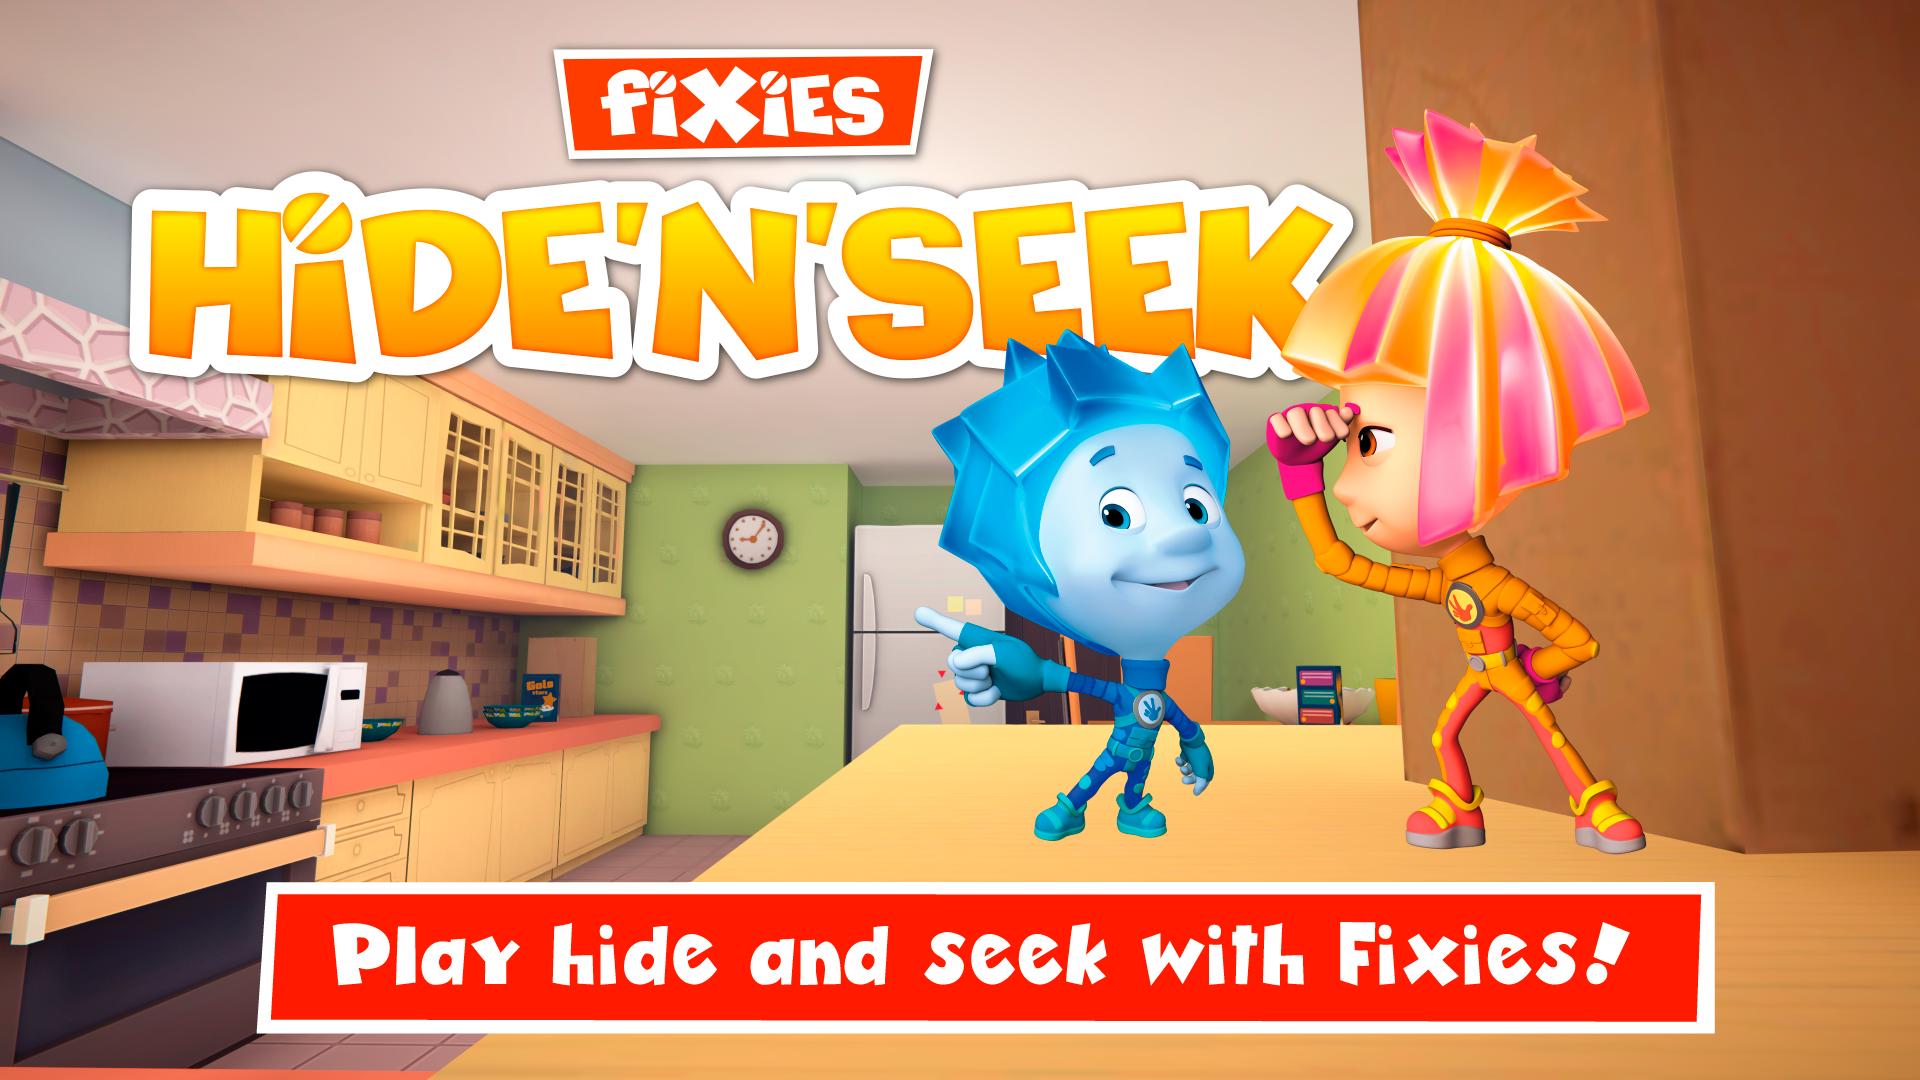 Fixies Hide And Seek Online Game For Android Apk Download - roblox hide and seek game online